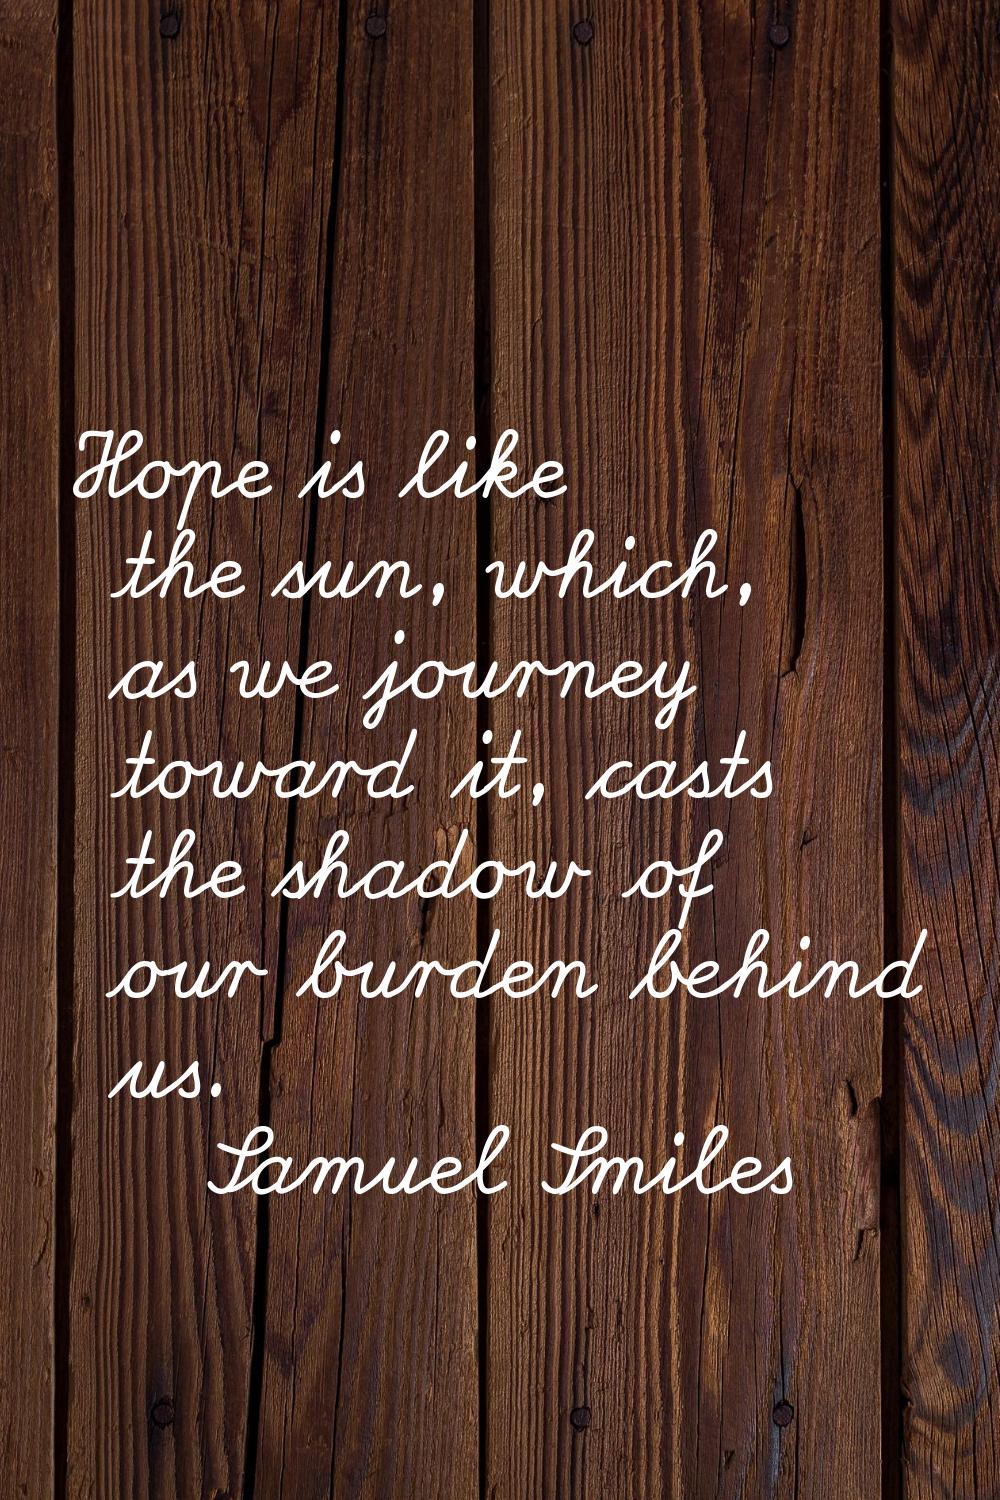 Hope is like the sun, which, as we journey toward it, casts the shadow of our burden behind us.